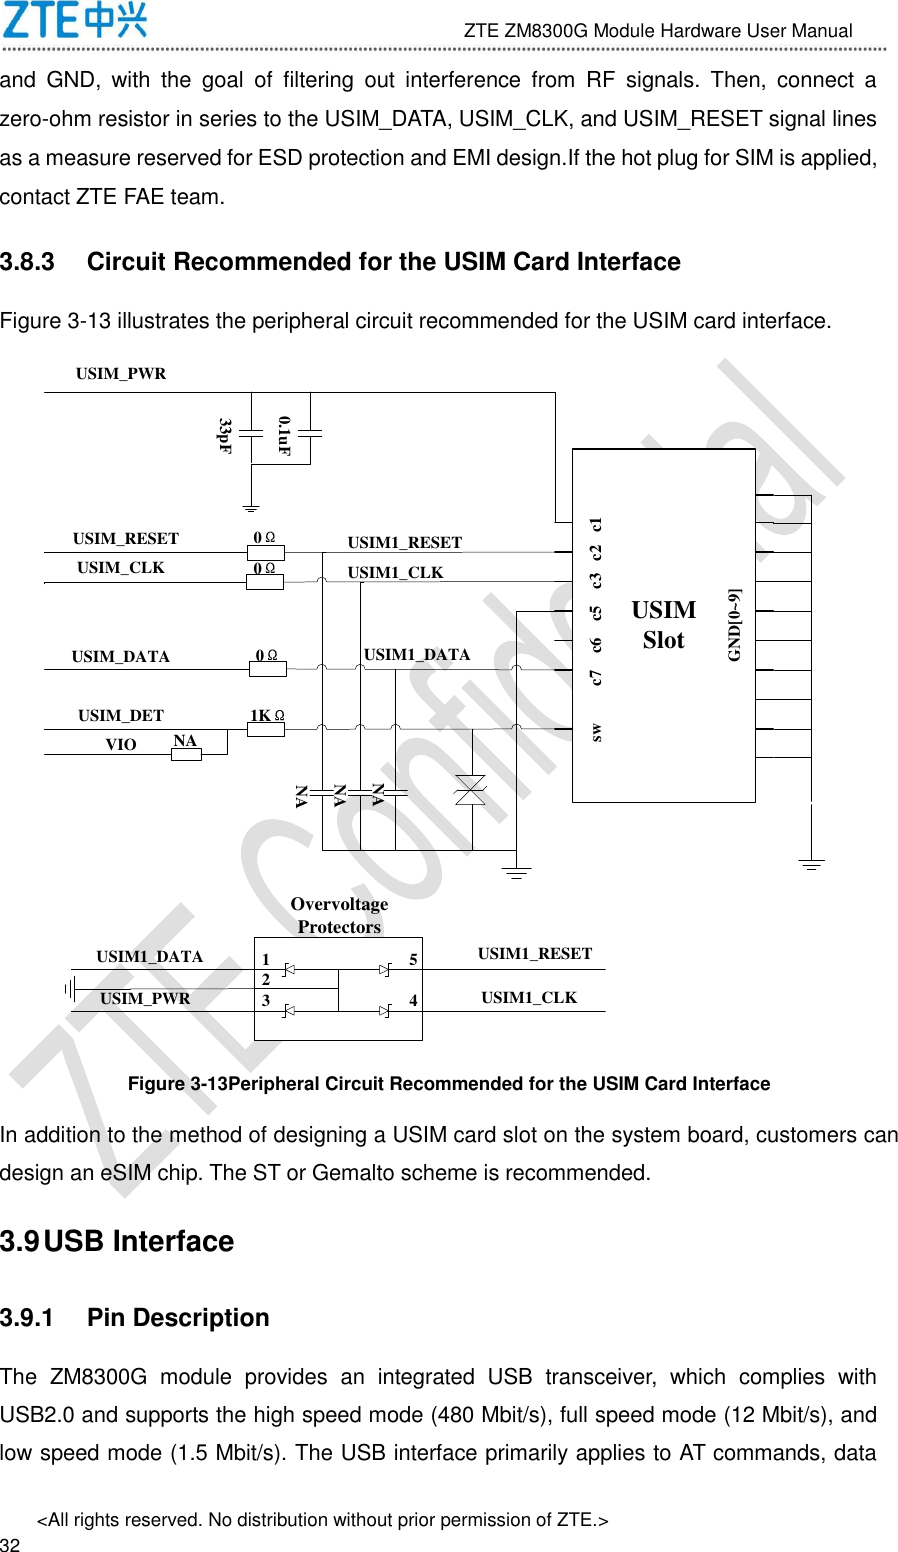                              ZTE ZM8300G Module Hardware User Manual &lt;All rights reserved. No distribution without prior permission of ZTE.&gt;                                                               32 and  GND,  with  the  goal  of  filtering  out  interference  from  RF  signals.  Then,  connect  a zero-ohm resistor in series to the USIM_DATA, USIM_CLK, and USIM_RESET signal lines as a measure reserved for ESD protection and EMI design.If the hot plug for SIM is applied, contact ZTE FAE team. 3.8.3  Circuit Recommended for the USIM Card Interface Figure 3-13 illustrates the peripheral circuit recommended for the USIM card interface. USIMSlotsw         c7    c6    c5    c3   c2   c1GND[0~9]USIM_PWRUSIM_RESETUSIM_CLKUSIM_DATAUSIM_DETVIO33pF0.1uF0Ω0Ω0Ω1KΩNANANANA12345USIM1_DATAUSIM_PWRUSIM1_RESETUSIM1_CLKOvervoltage ProtectorsUSIM1_RESETUSIM1_CLKUSIM1_DATA Figure 3-13Peripheral Circuit Recommended for the USIM Card Interface In addition to the method of designing a USIM card slot on the system board, customers can design an eSIM chip. The ST or Gemalto scheme is recommended. 3.9 USB Interface 3.9.1  Pin Description The  ZM8300G  module  provides  an  integrated  USB  transceiver,  which  complies  with USB2.0 and supports the high speed mode (480 Mbit/s), full speed mode (12 Mbit/s), and low speed mode (1.5 Mbit/s). The USB interface primarily applies to AT commands, data 